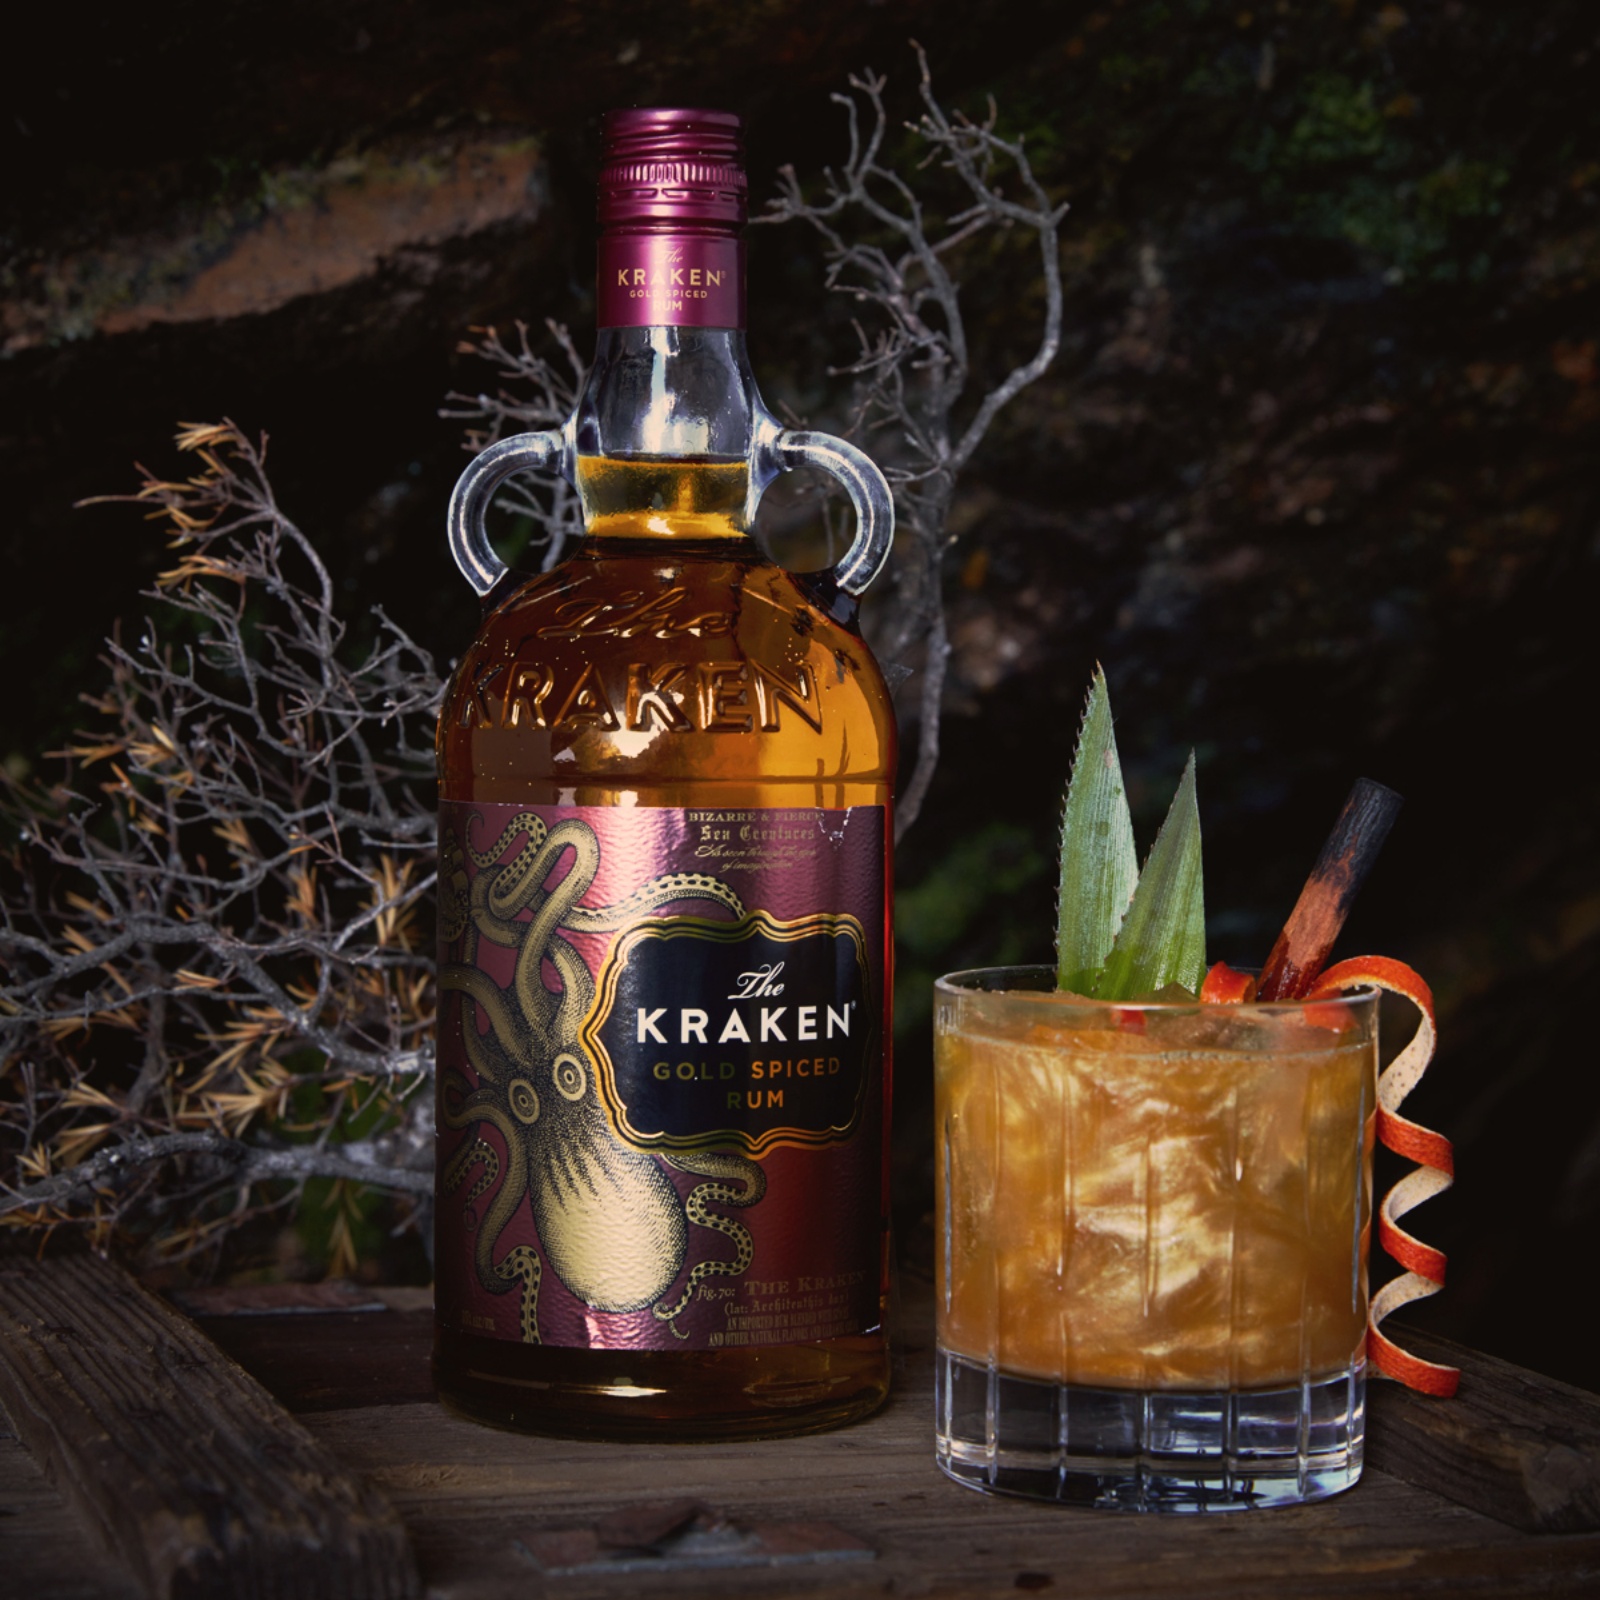 <h3>The Kraken Gold Spiced Rum</h3><h4>The Legend Continues</h4>